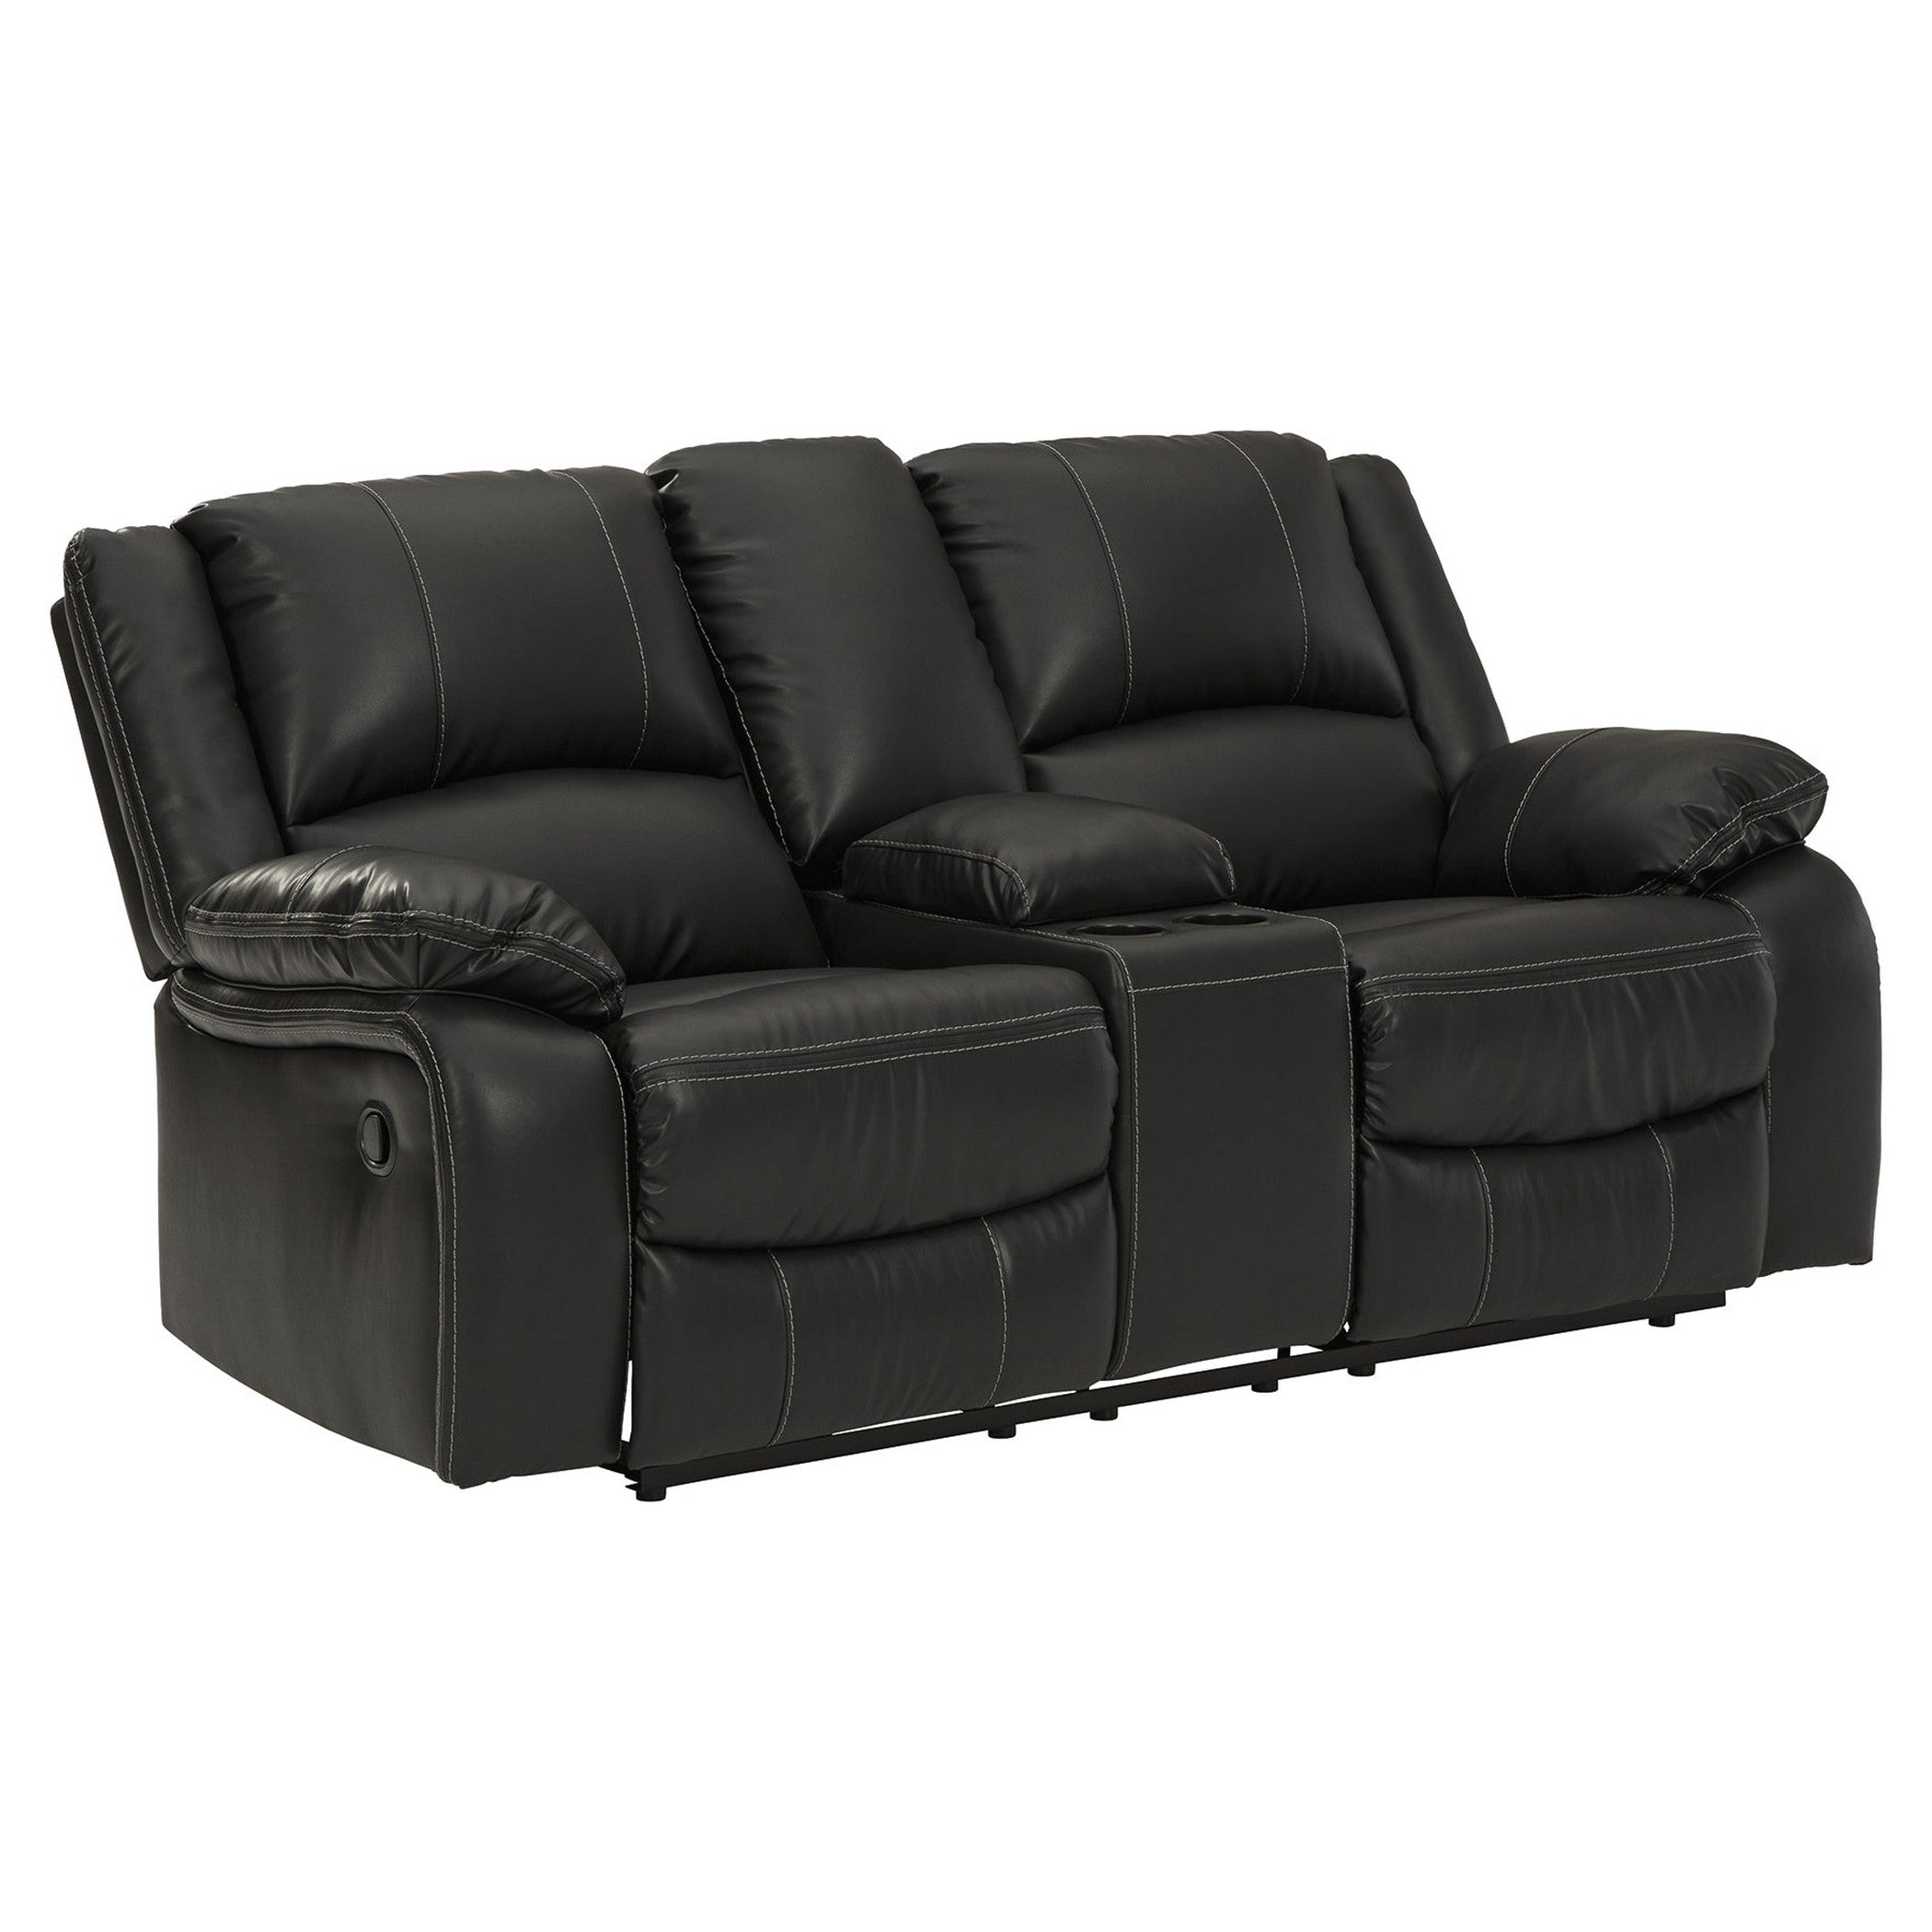 Calderwell Reclining Loveseat with Console Ash-7710194